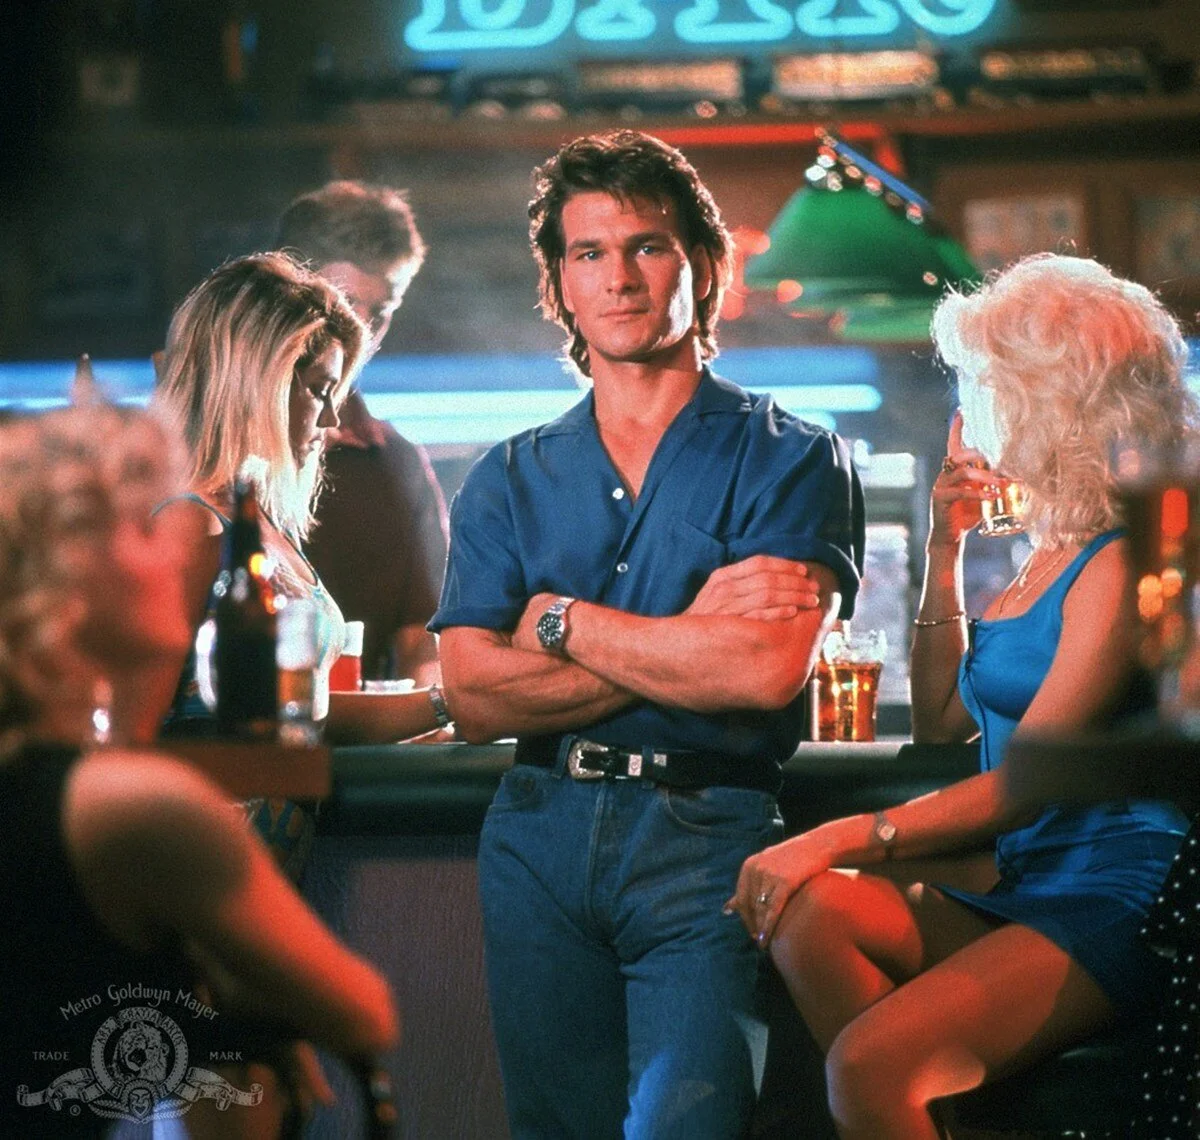 Is there going to be a Road House remake?